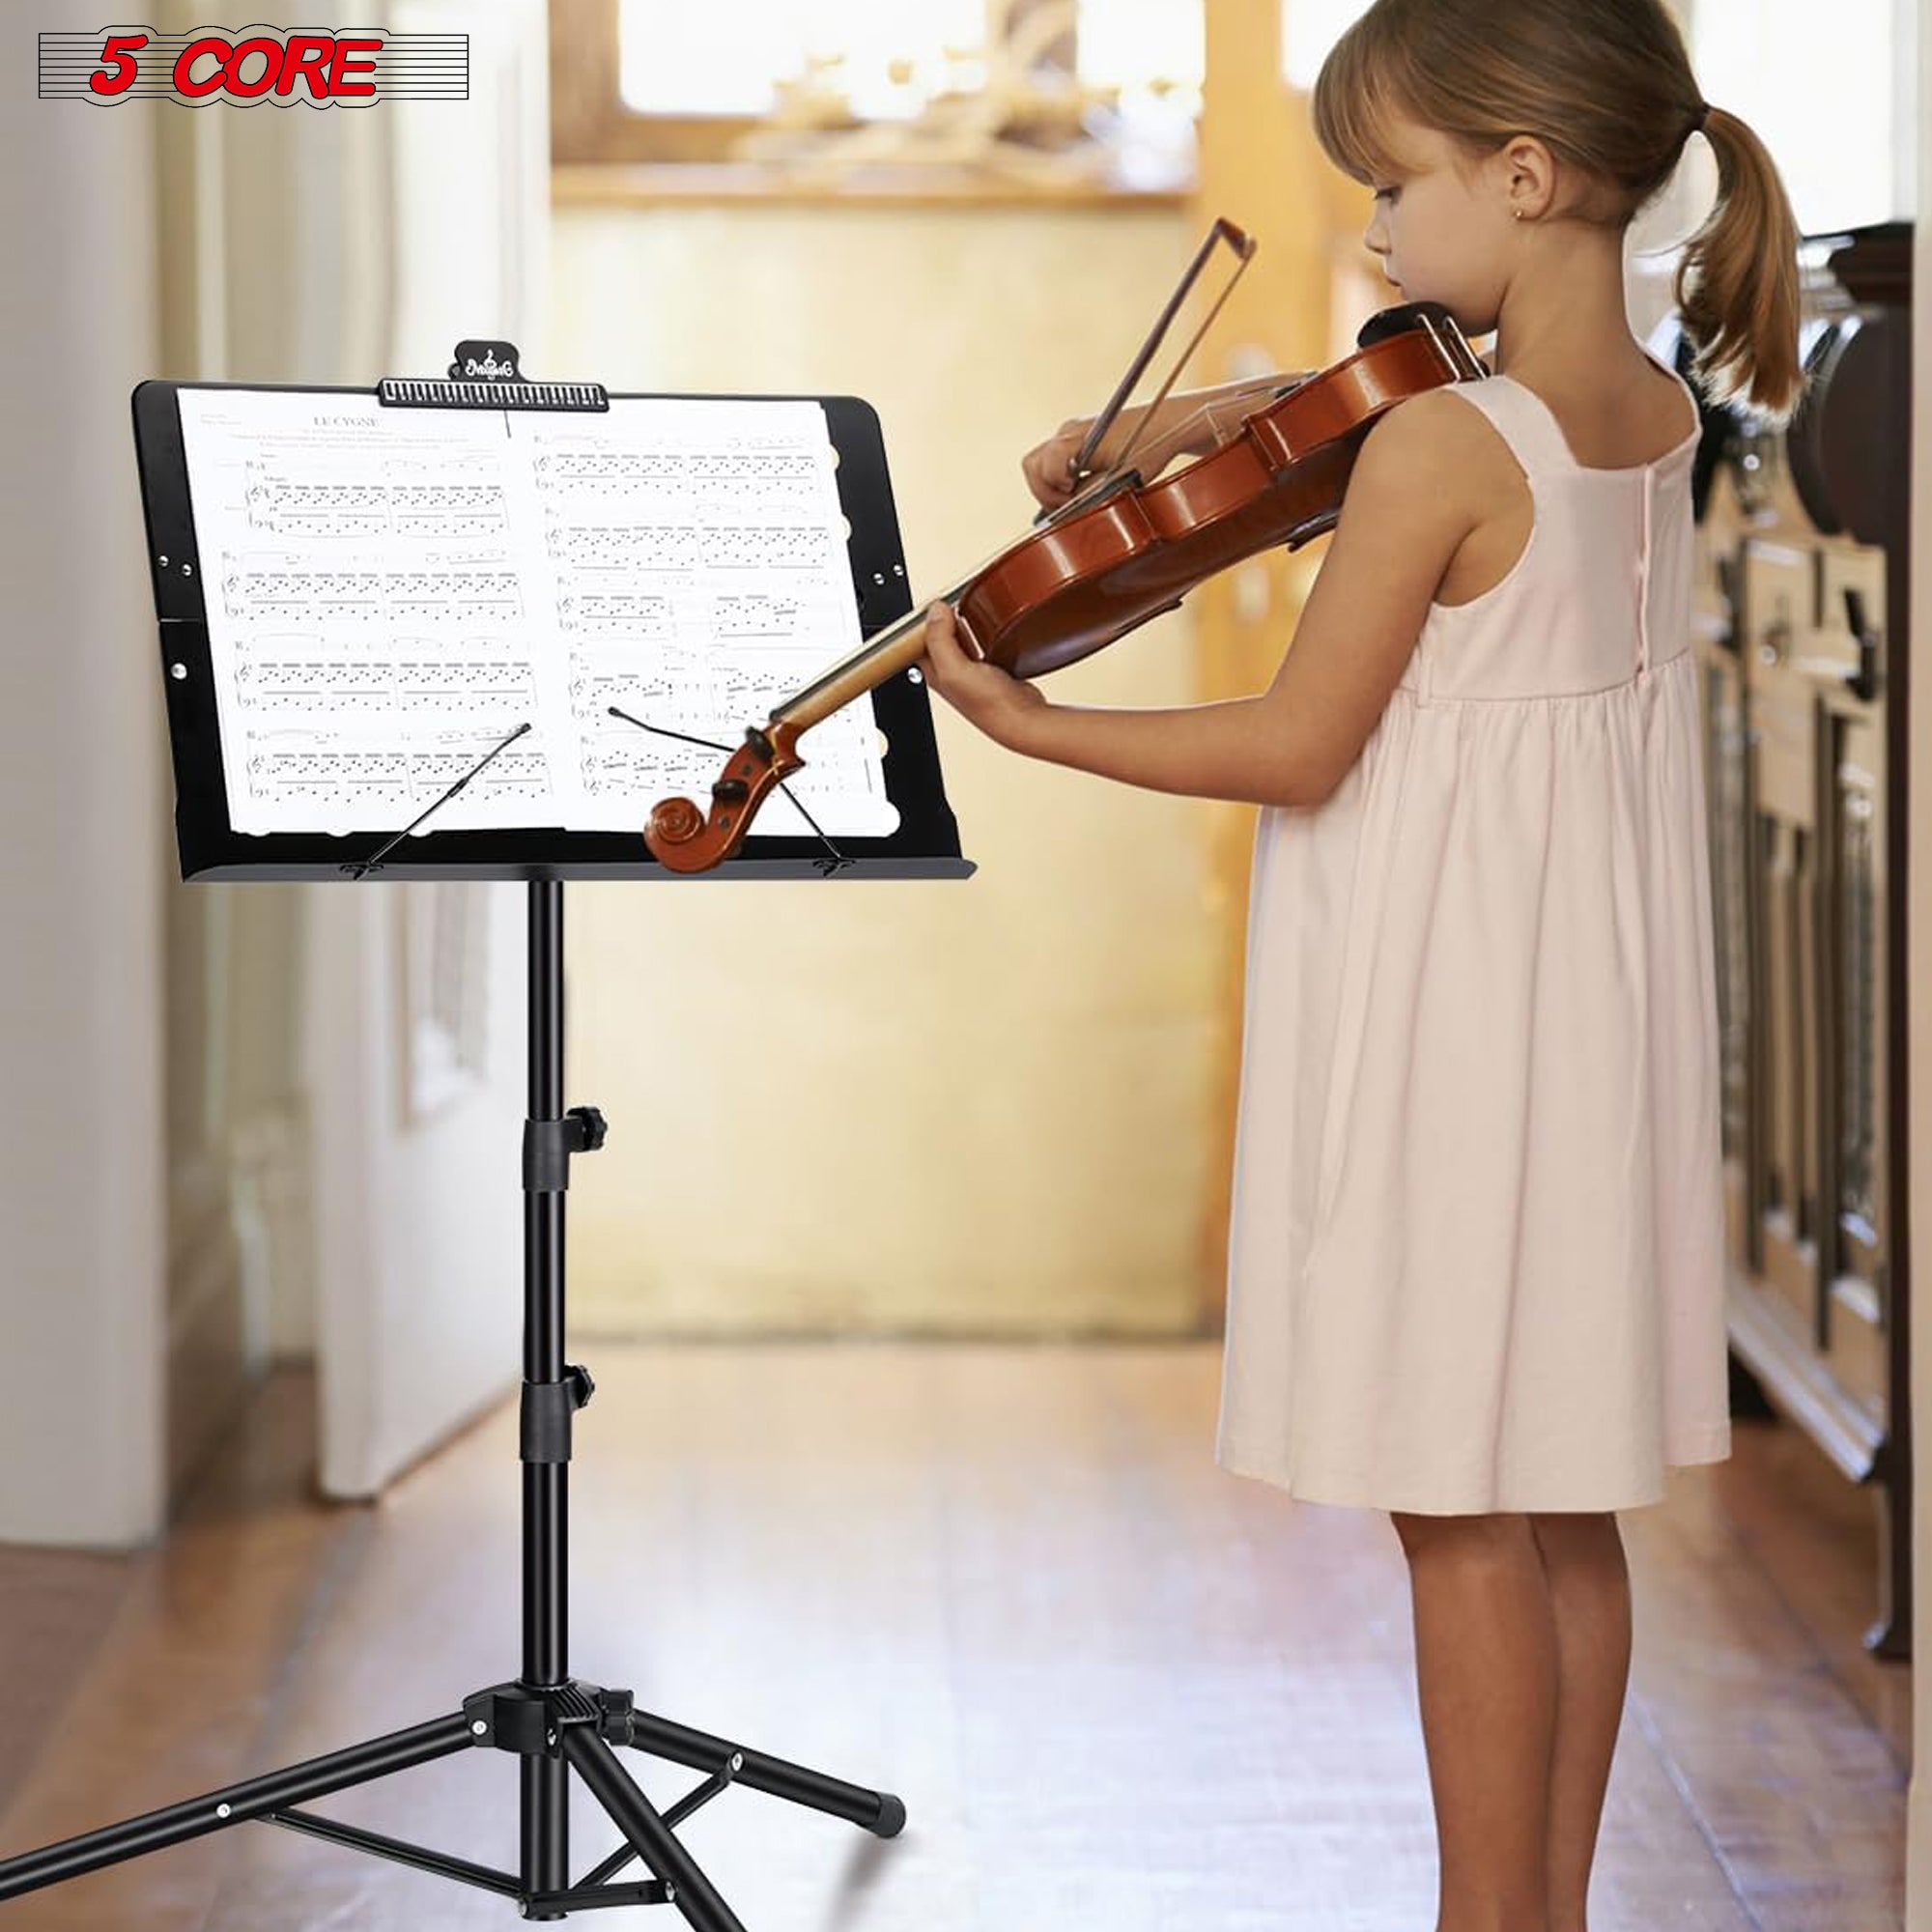 5 Core Music Stand for Sheet Music Heavy Duty Folding Portable Stands Light Weight Book Clip Holder Music Accessories Travel Carry Bag -MUS FLD HD